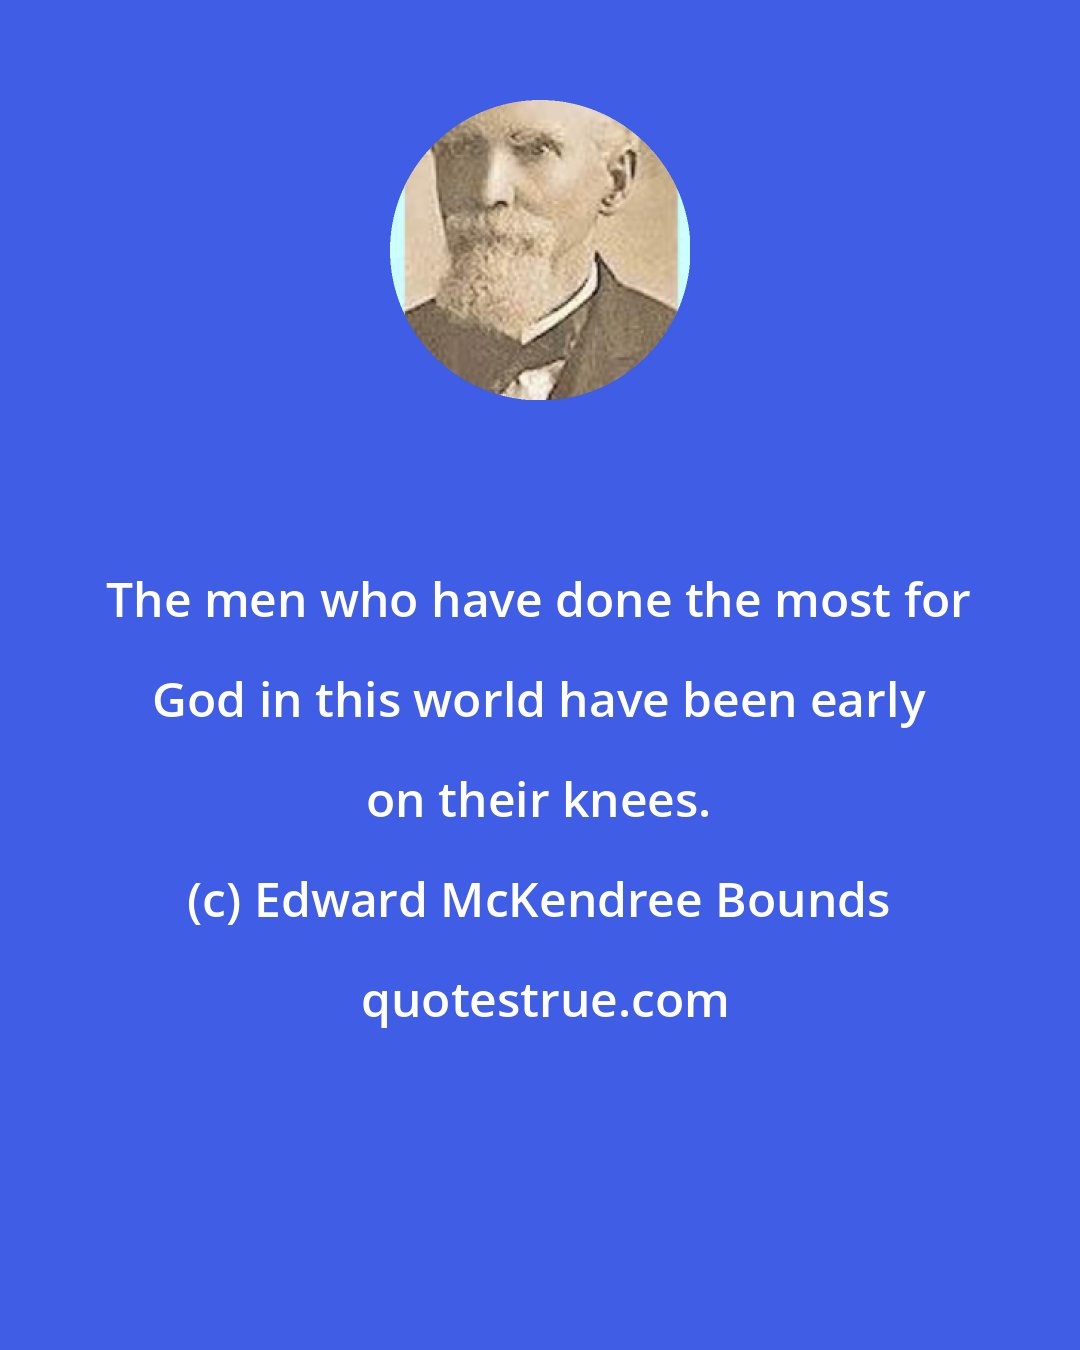 Edward McKendree Bounds: The men who have done the most for God in this world have been early on their knees.